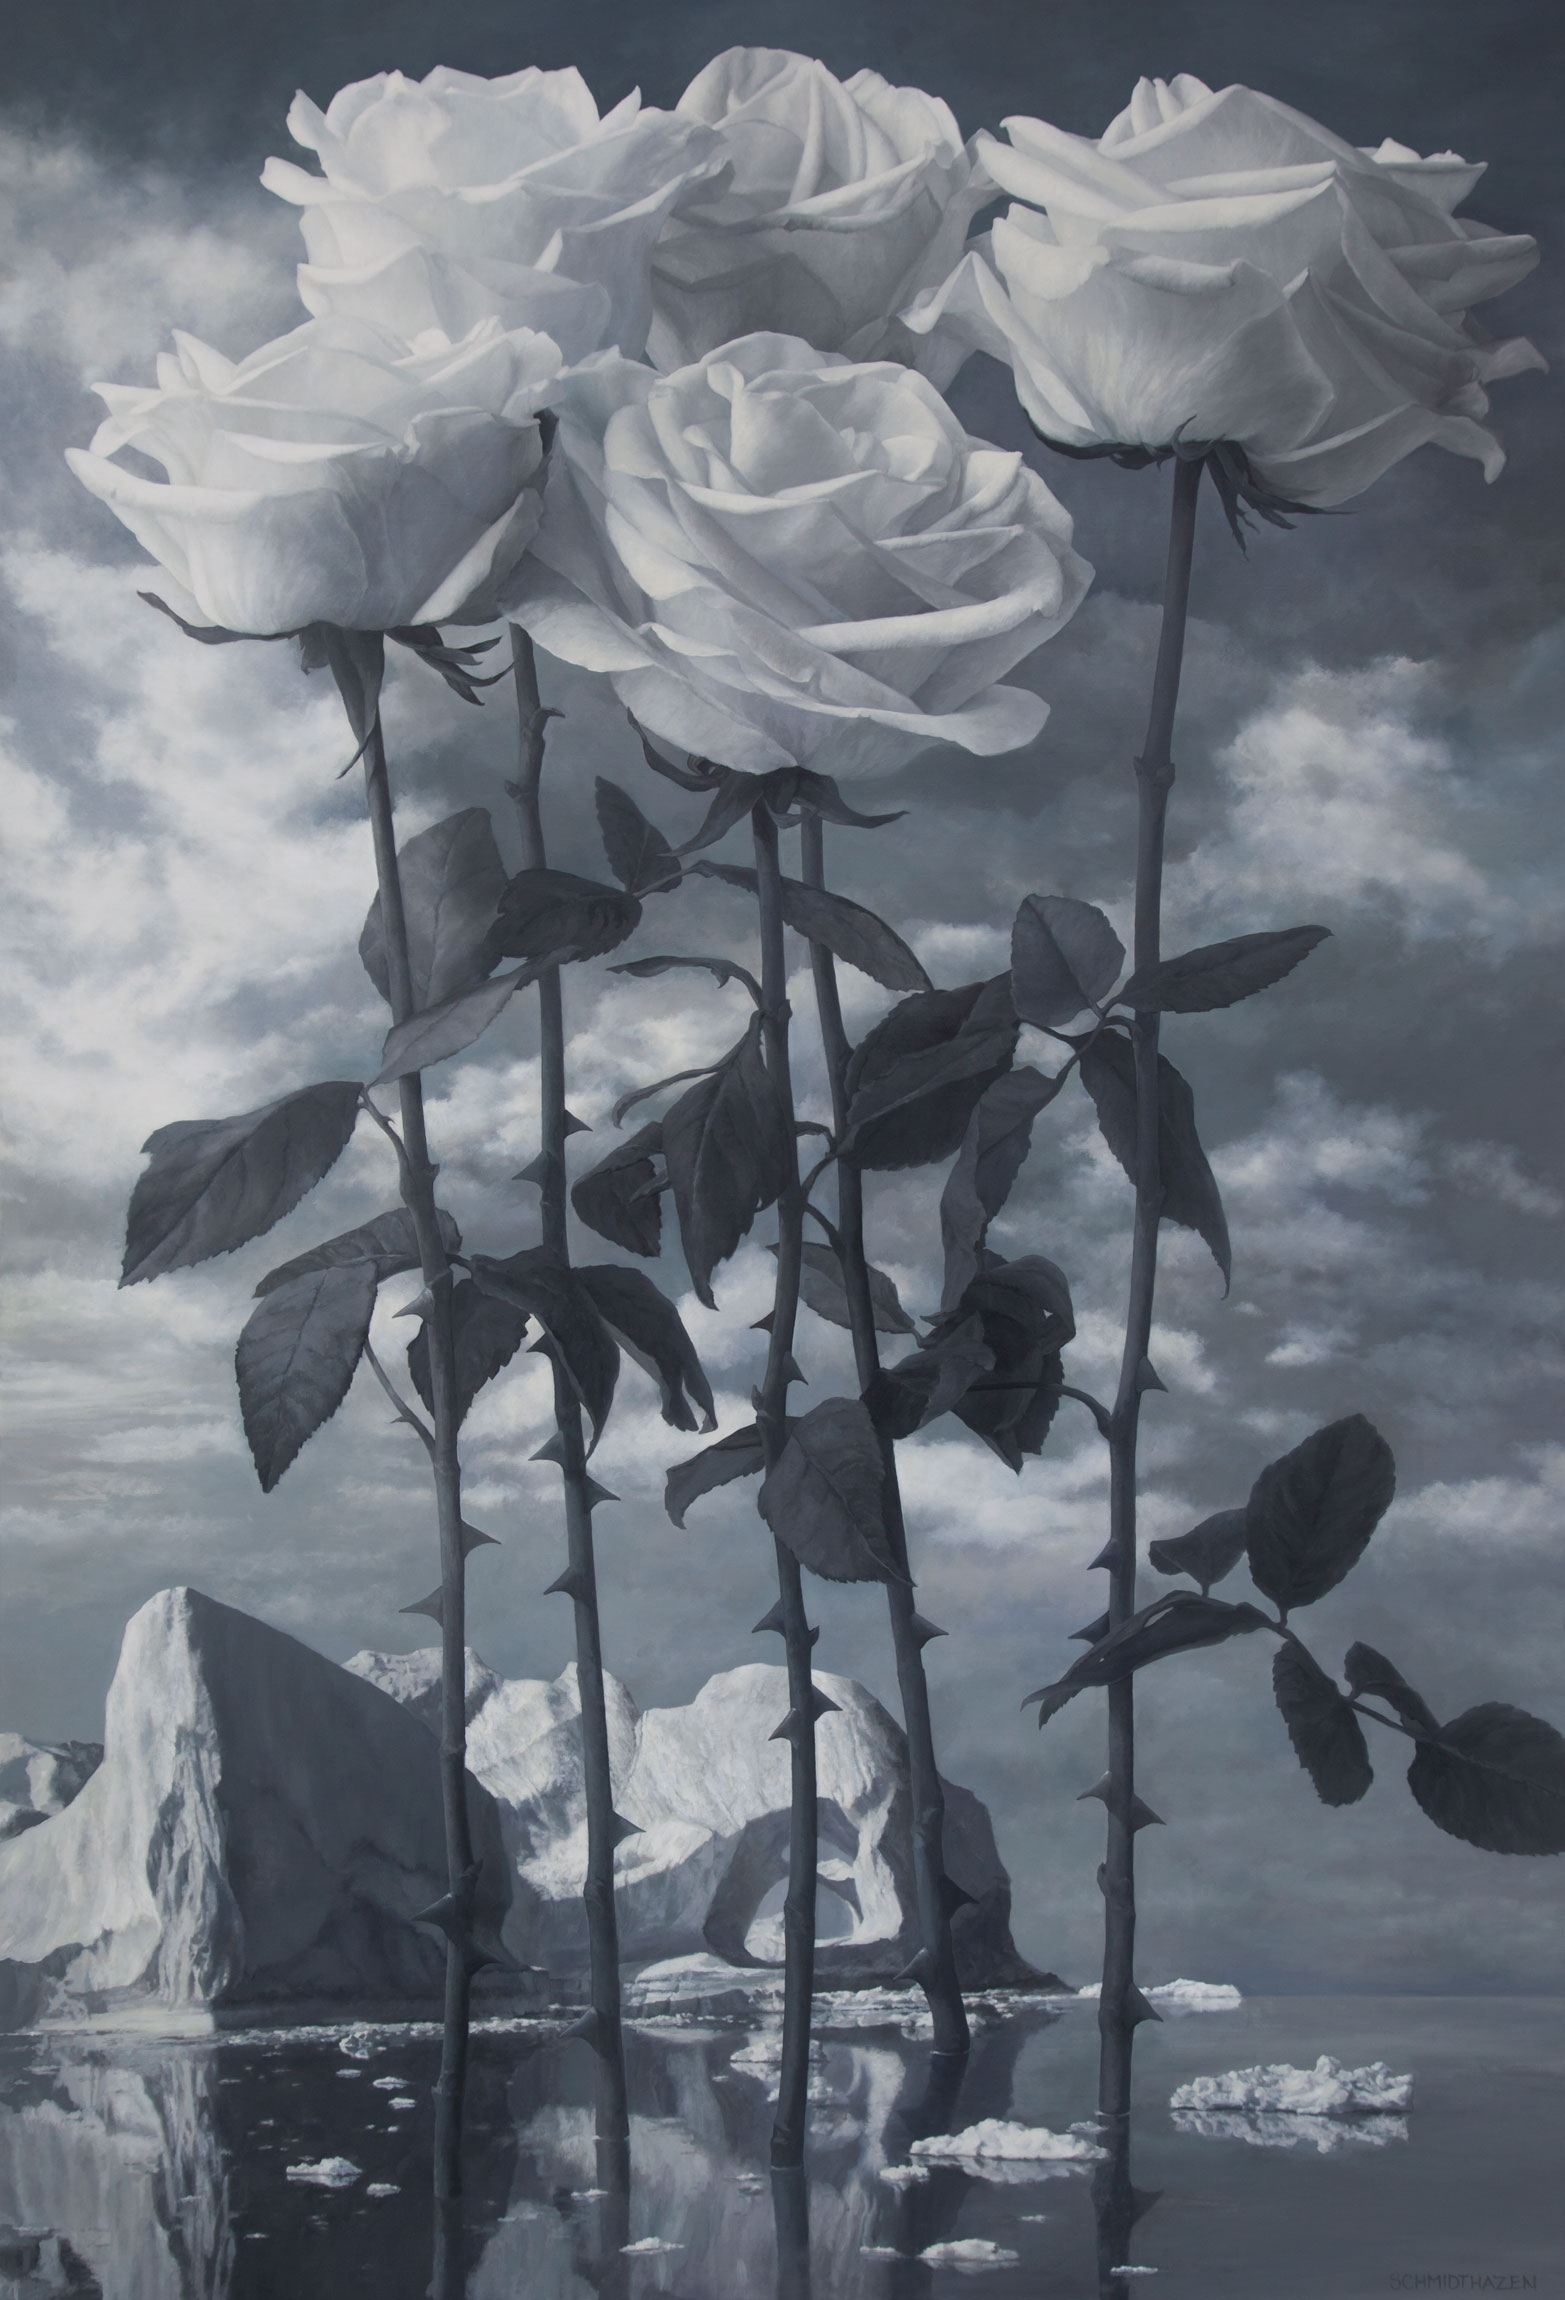 five white roses glacier sea, stormy sky, leaves on roses in black and white 